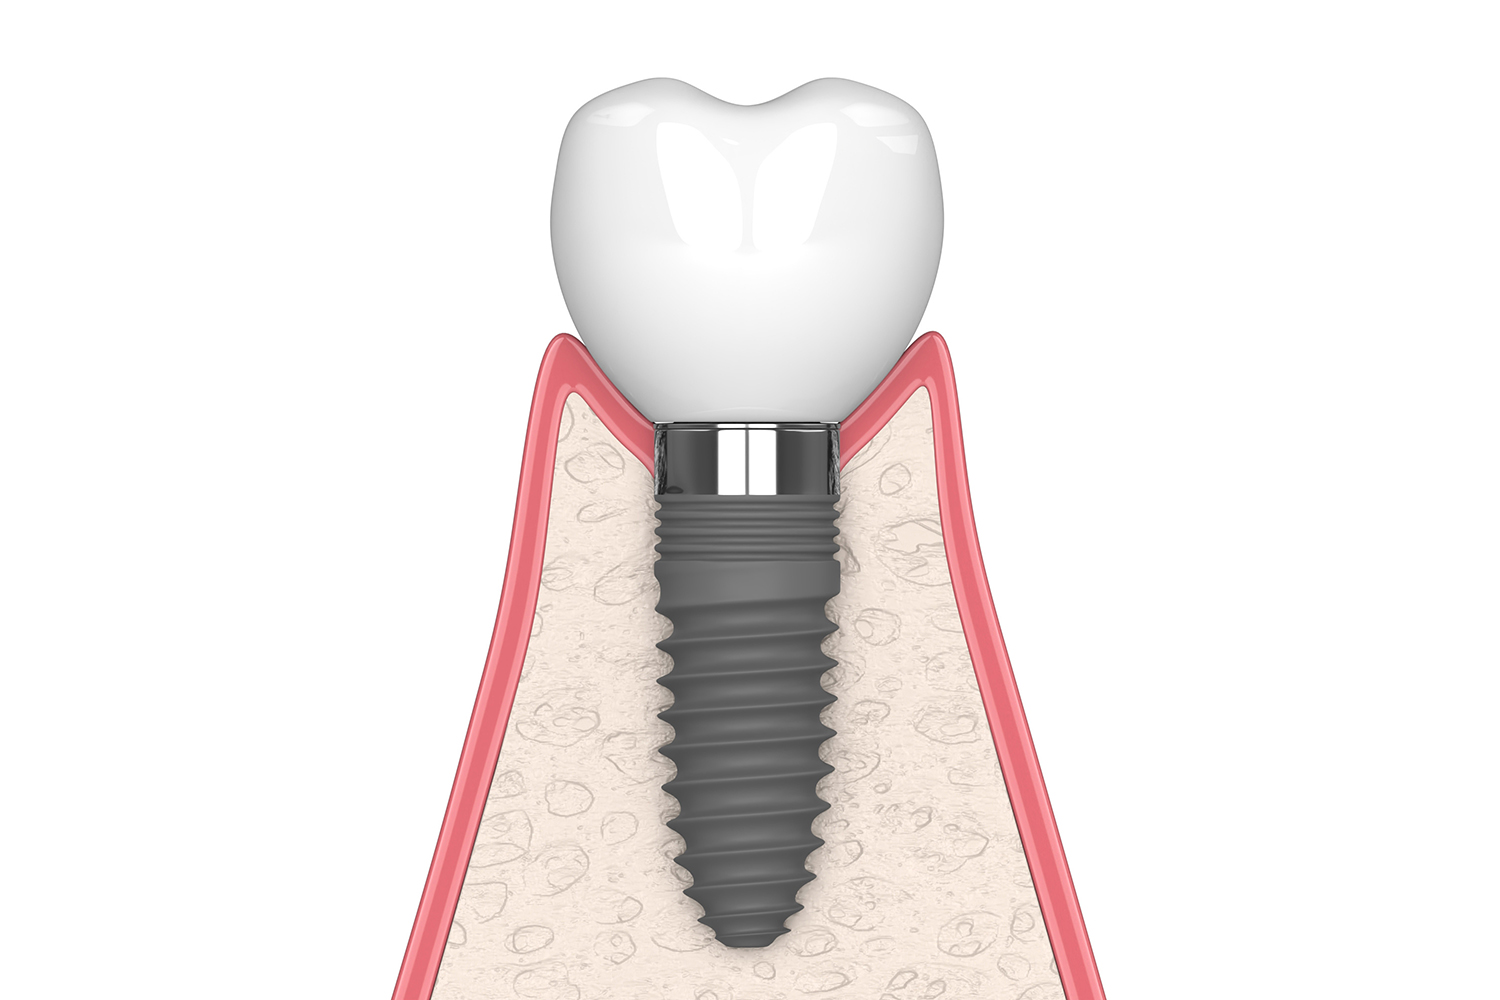 Cross section of a implant with crown showing healthy bone and gums